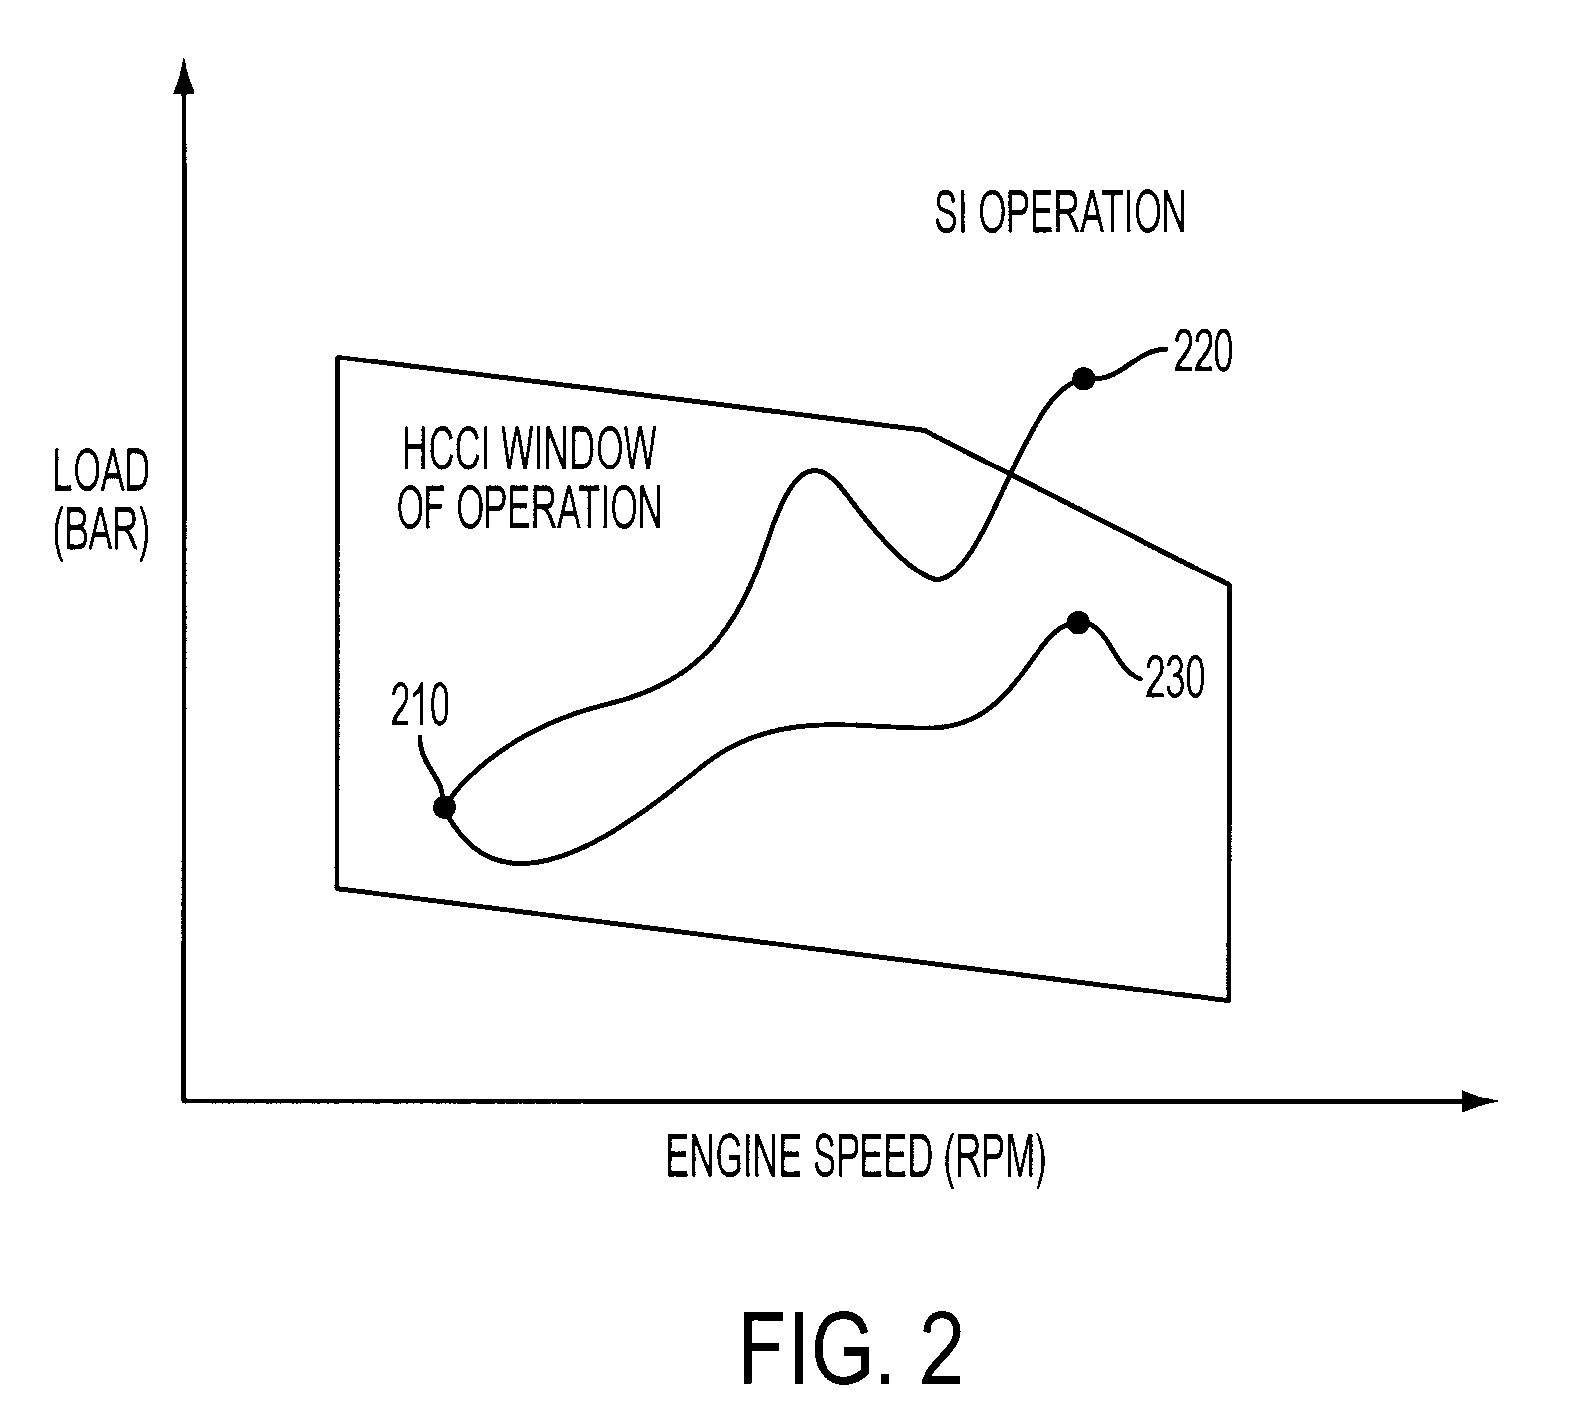 Vehicle engine system having predictive control function